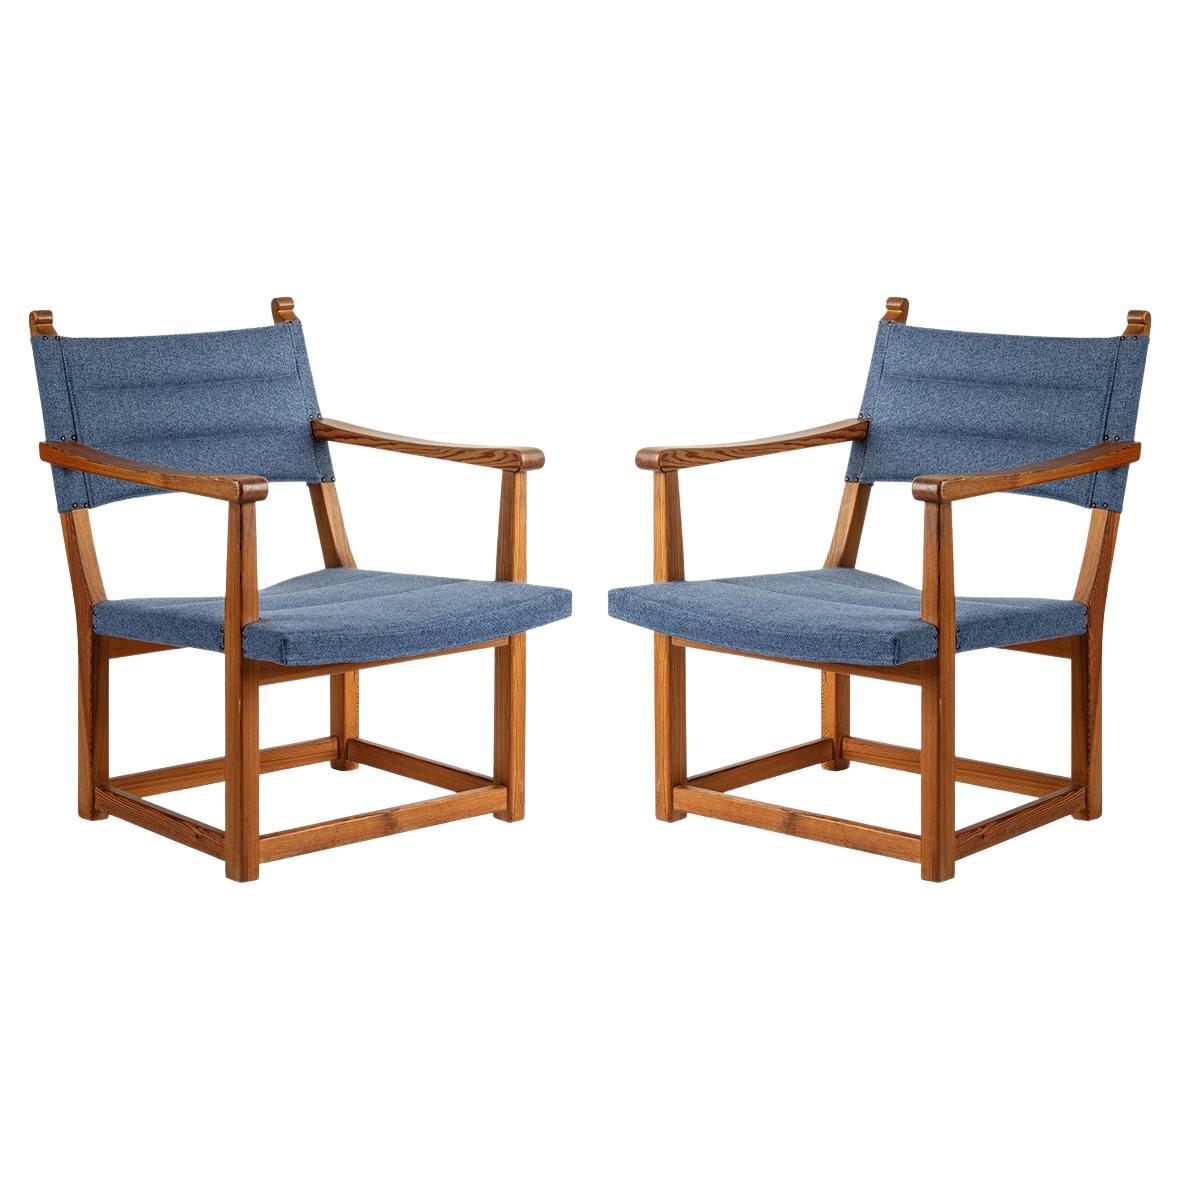 Carl Malmsten Pair of “Hängsits” Armchairs in Solid Pine, 1947 For Sale